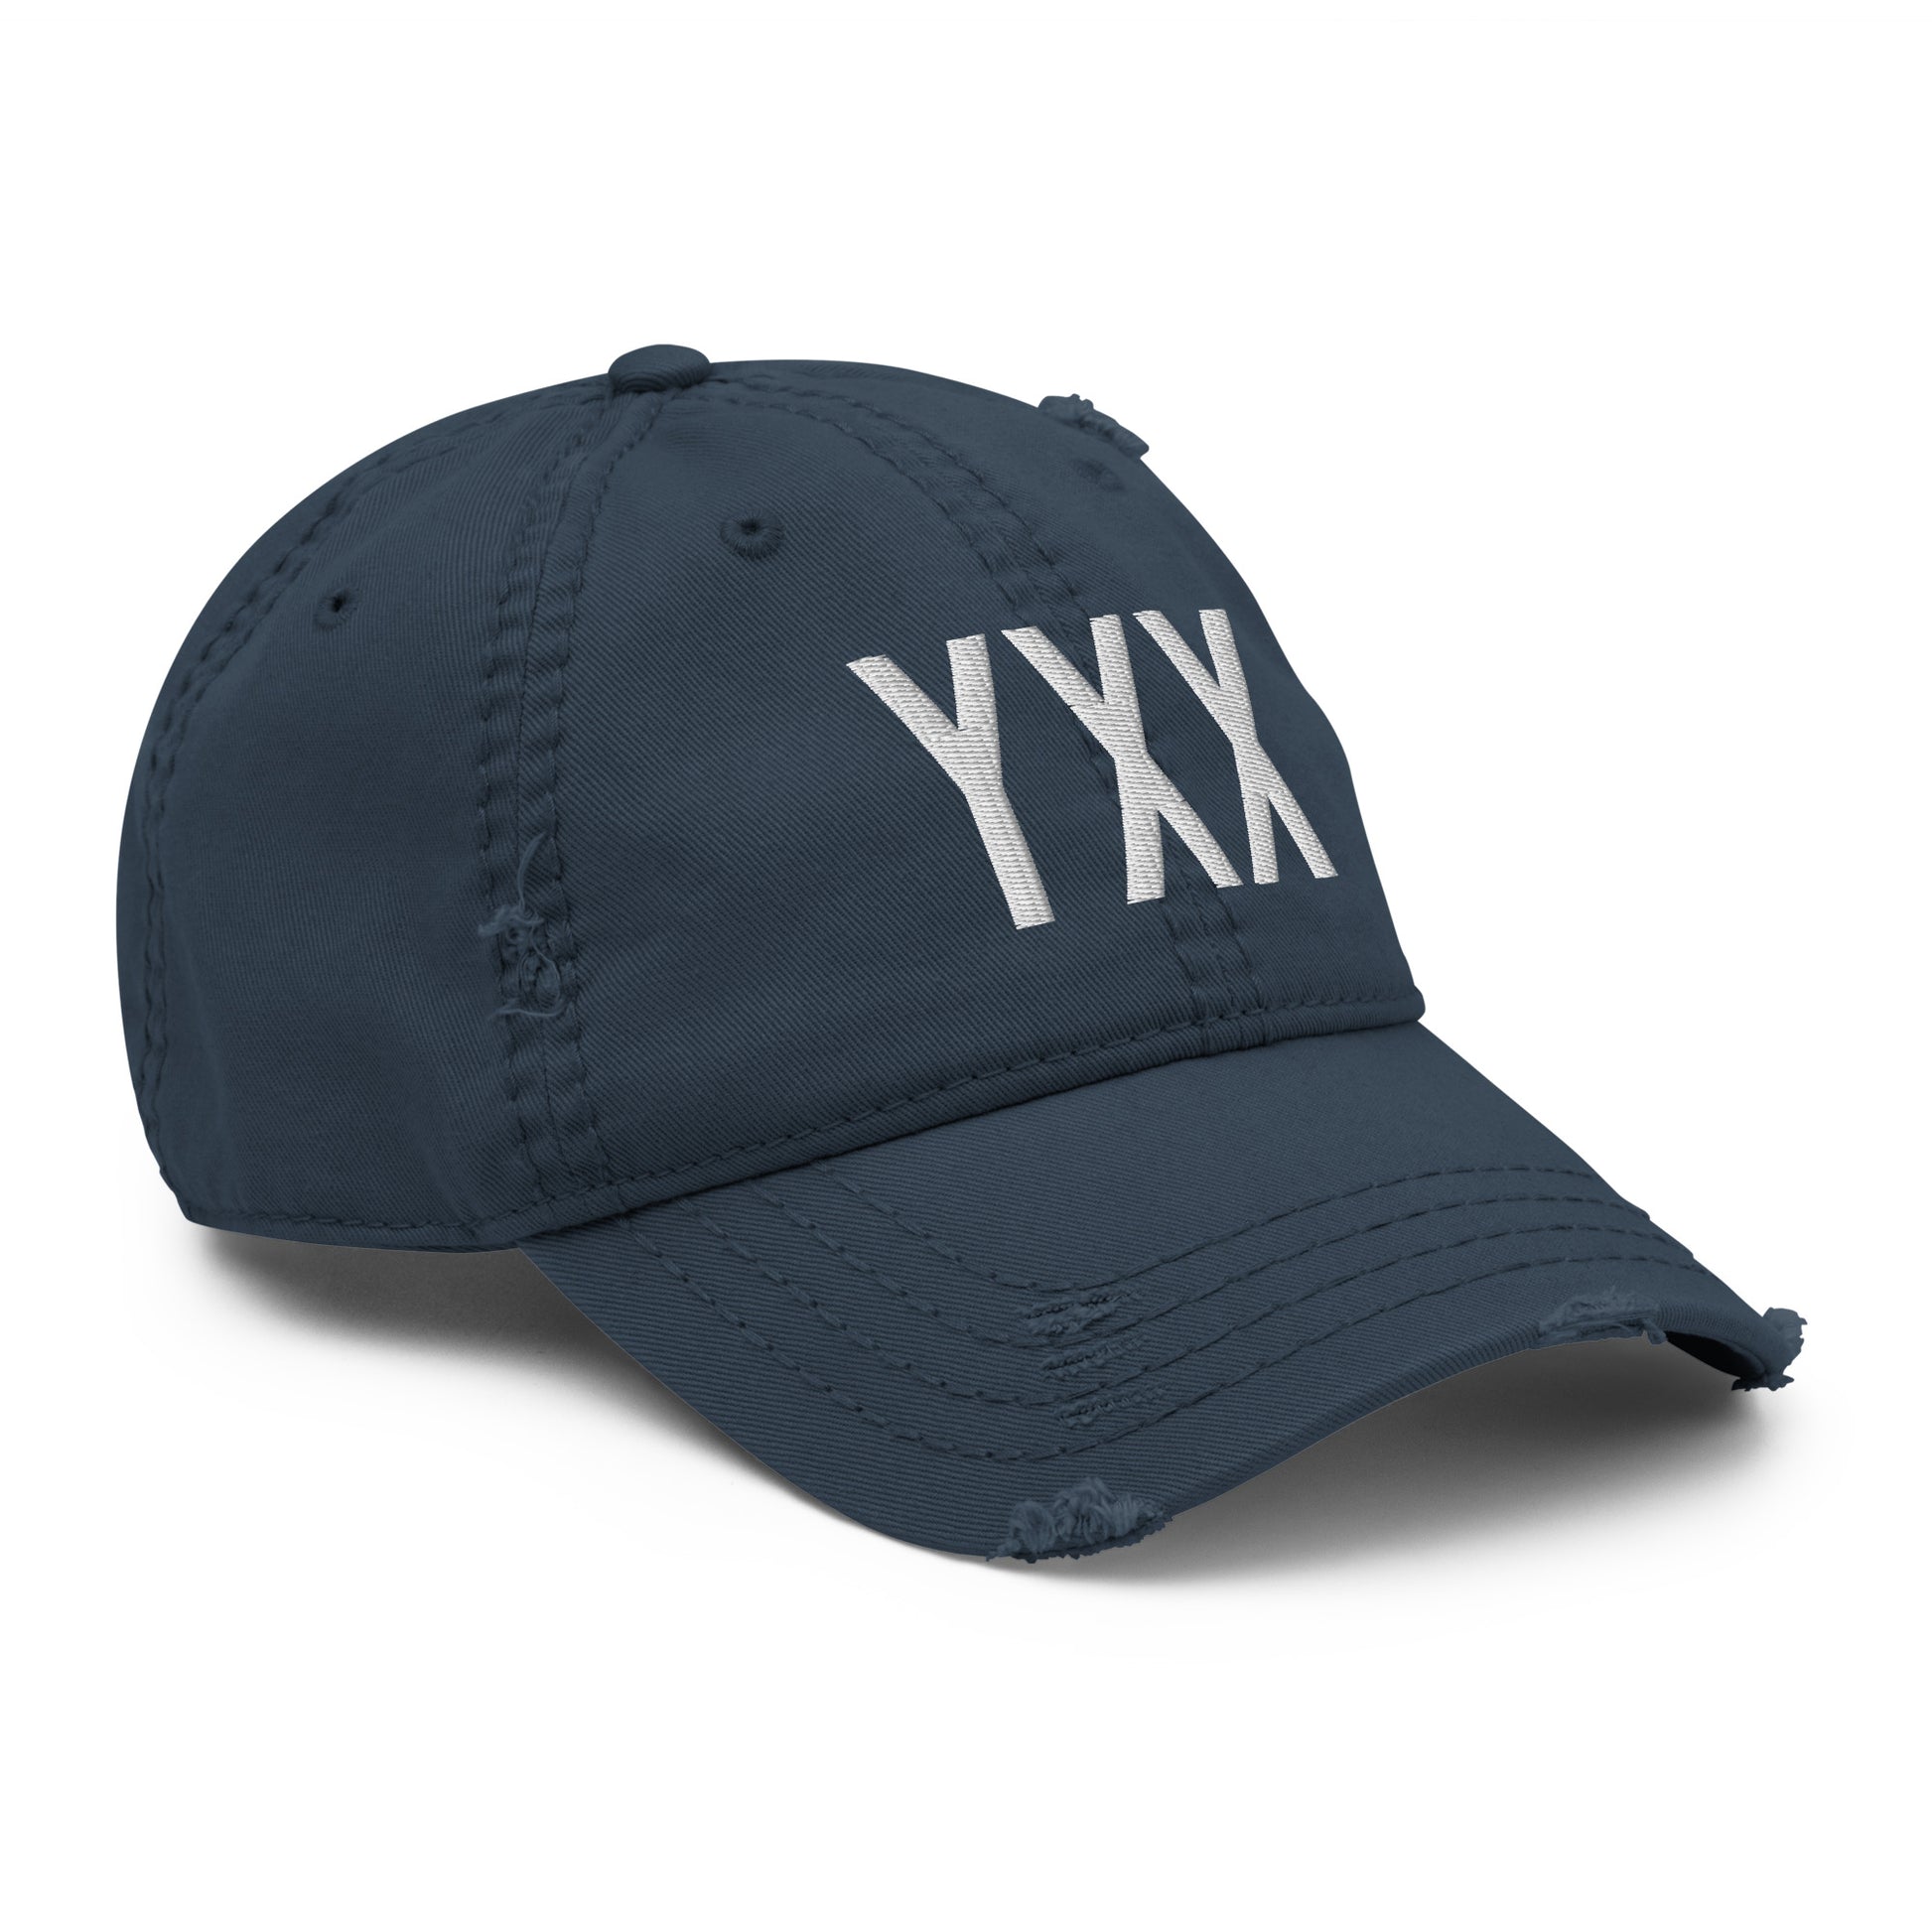 Airport Code Distressed Hat - White • YXX Abbotsford • YHM Designs - Image 14